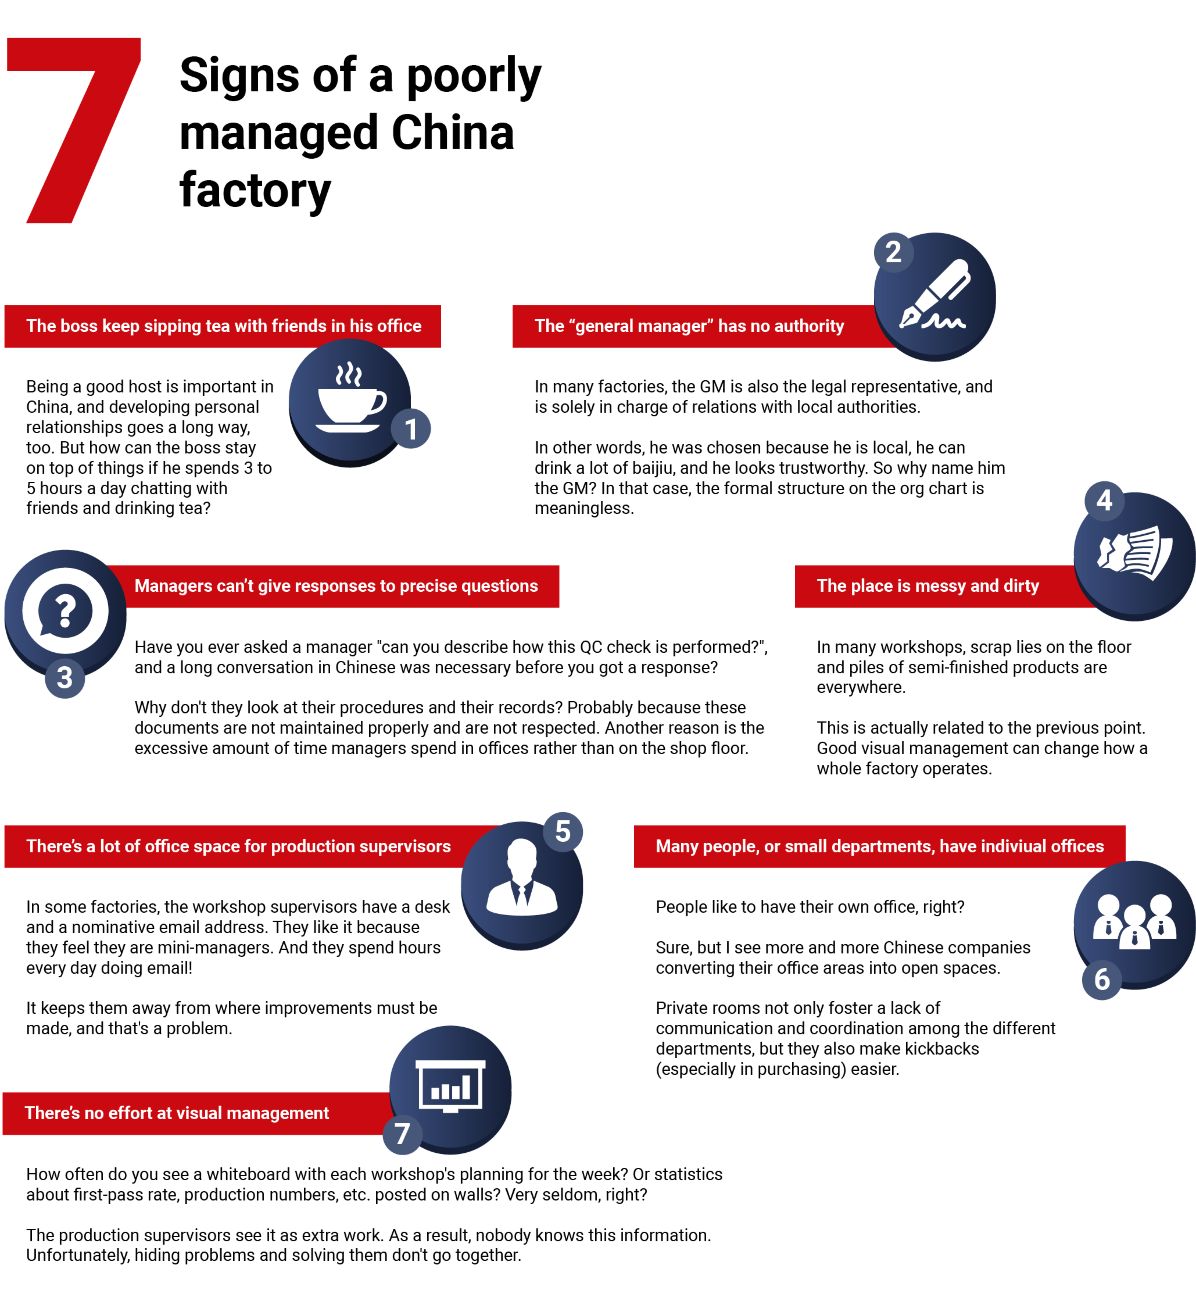 7-signs-of-a-poorly-managed-factory-in-china